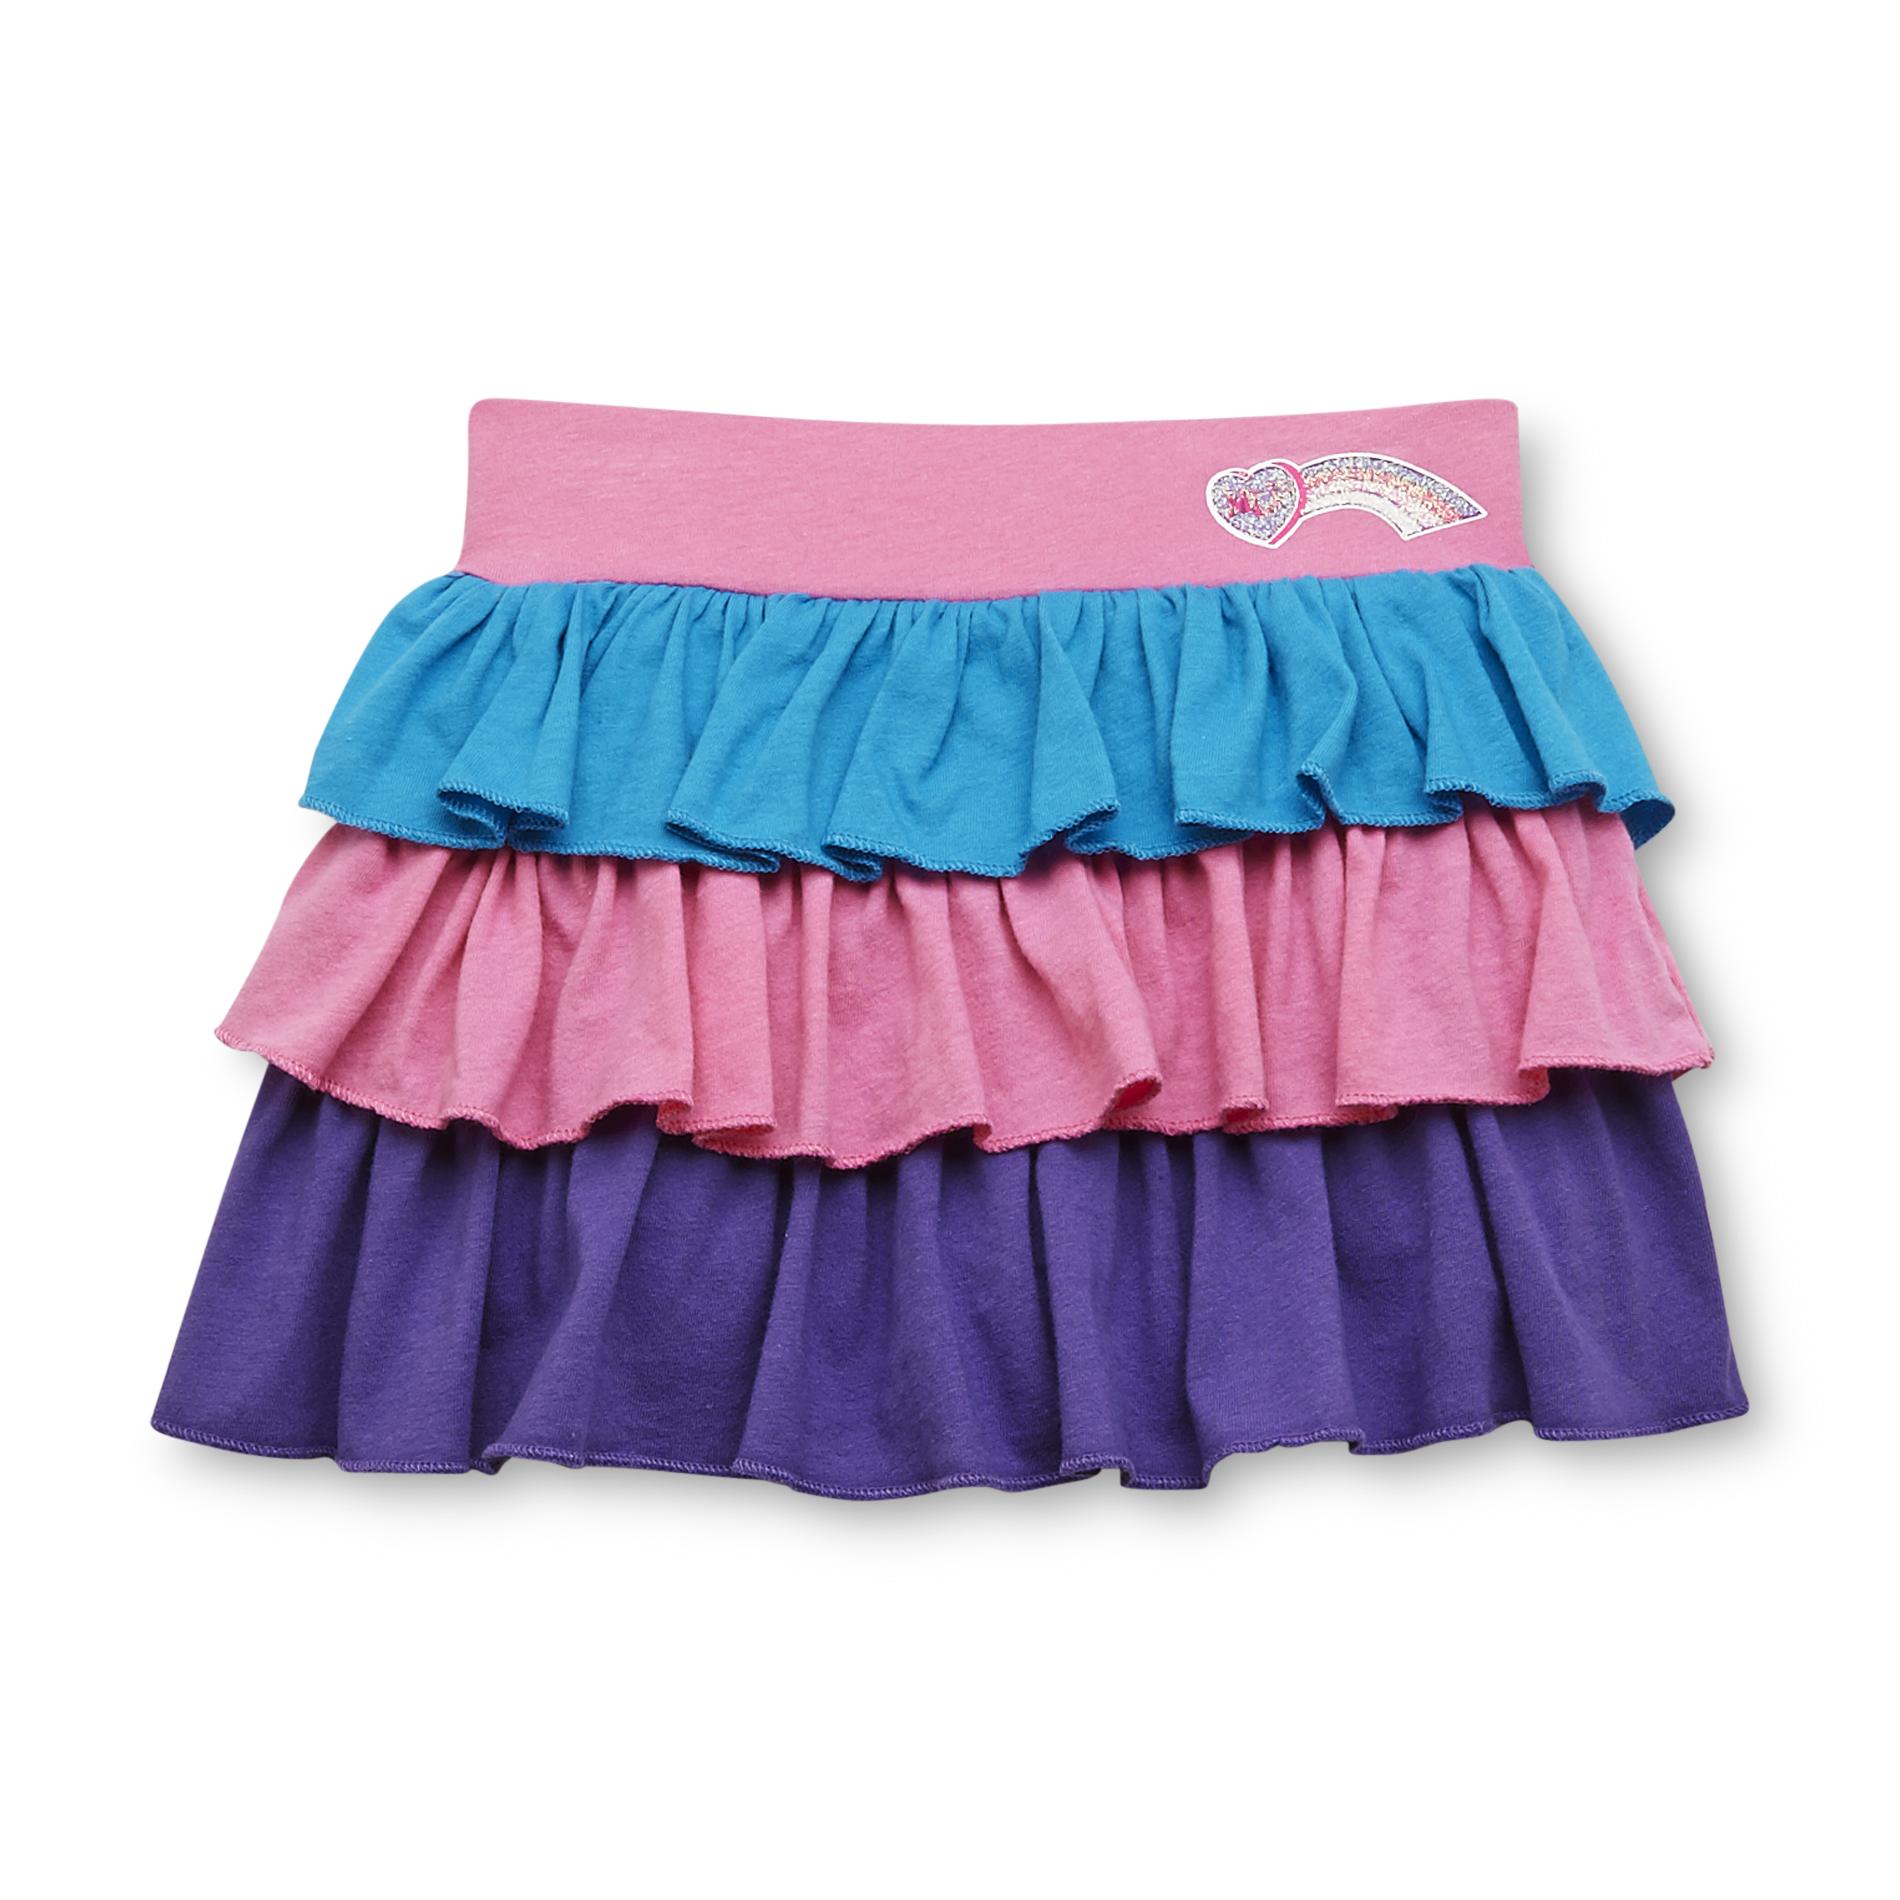 My Little Pony Girl's Tiered Scooter Skirt - Colorblock